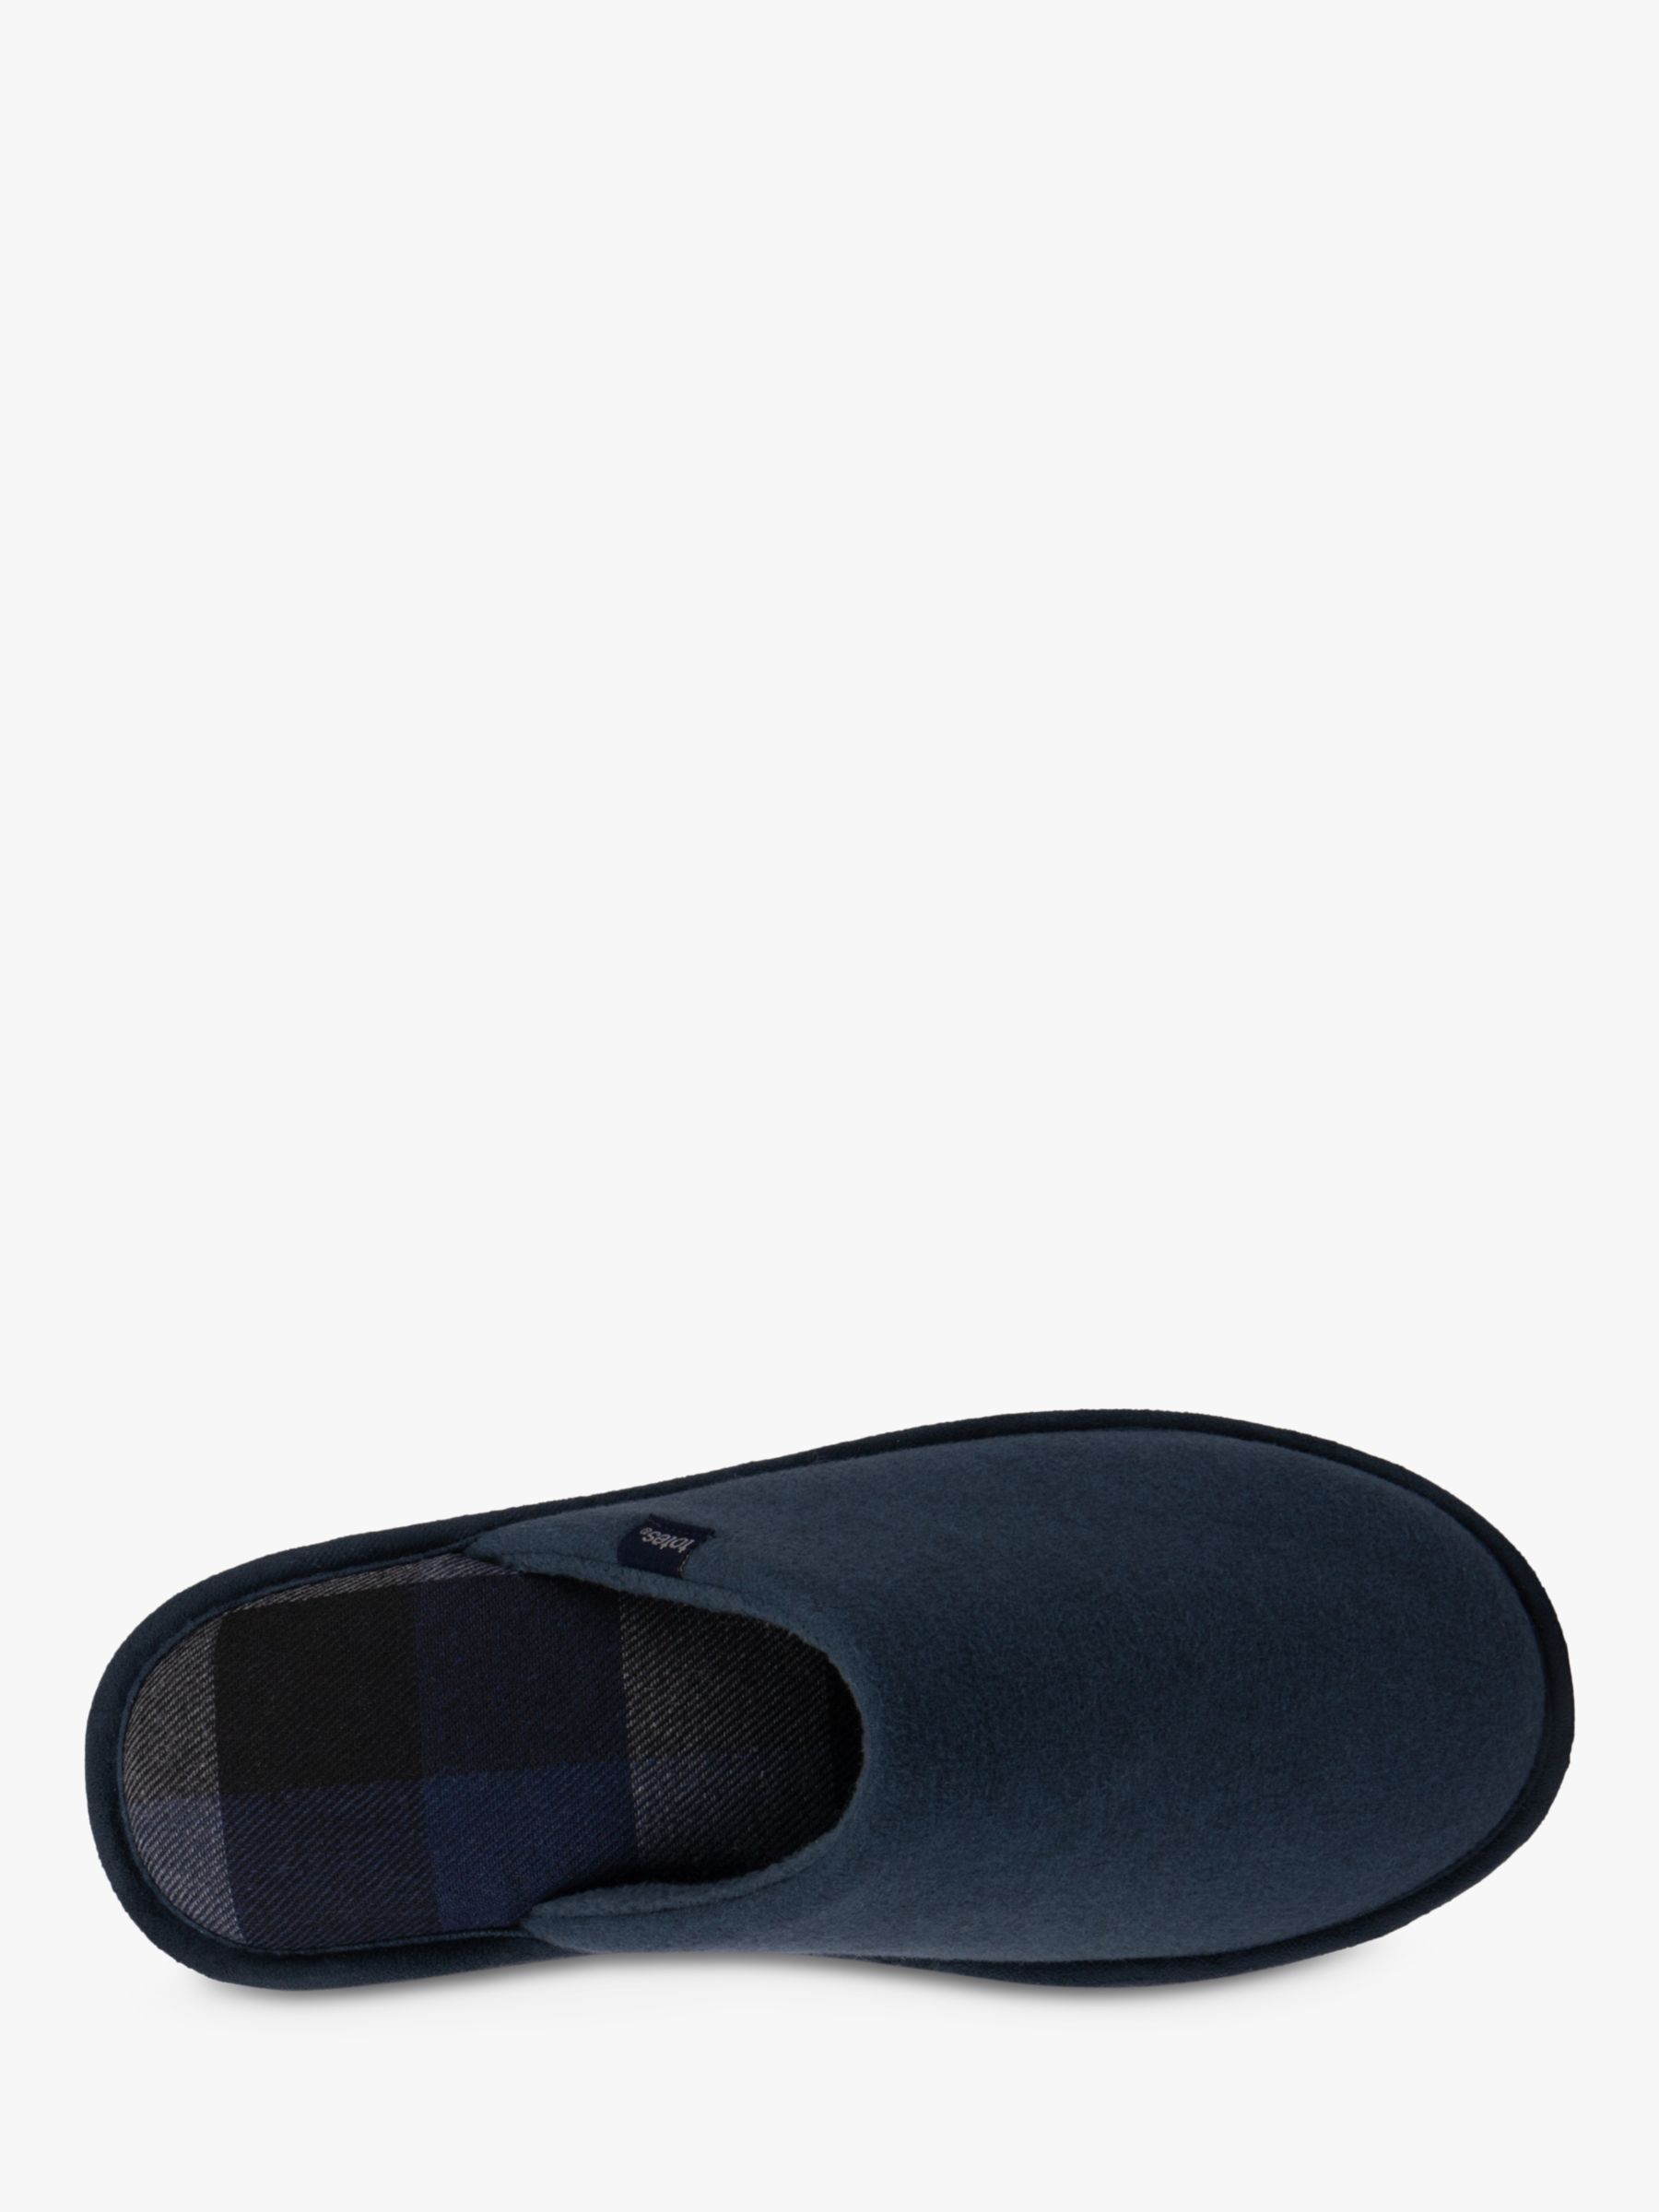 totes Check Lining Mule Slippers, Navy, S